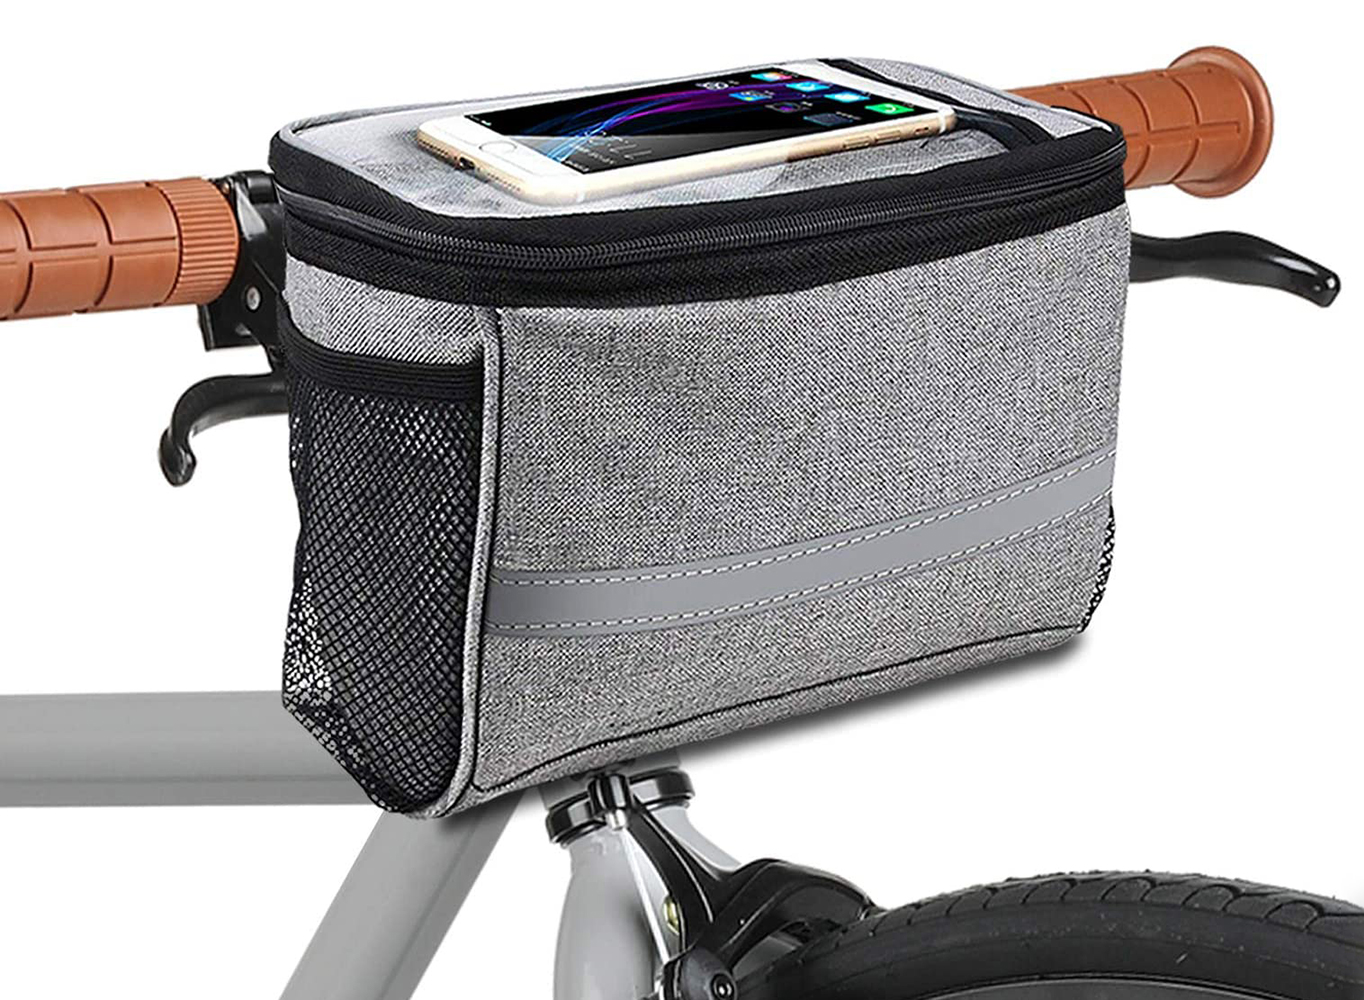 Best Bike Baskets 2022 - How to Carry Things on a Bike